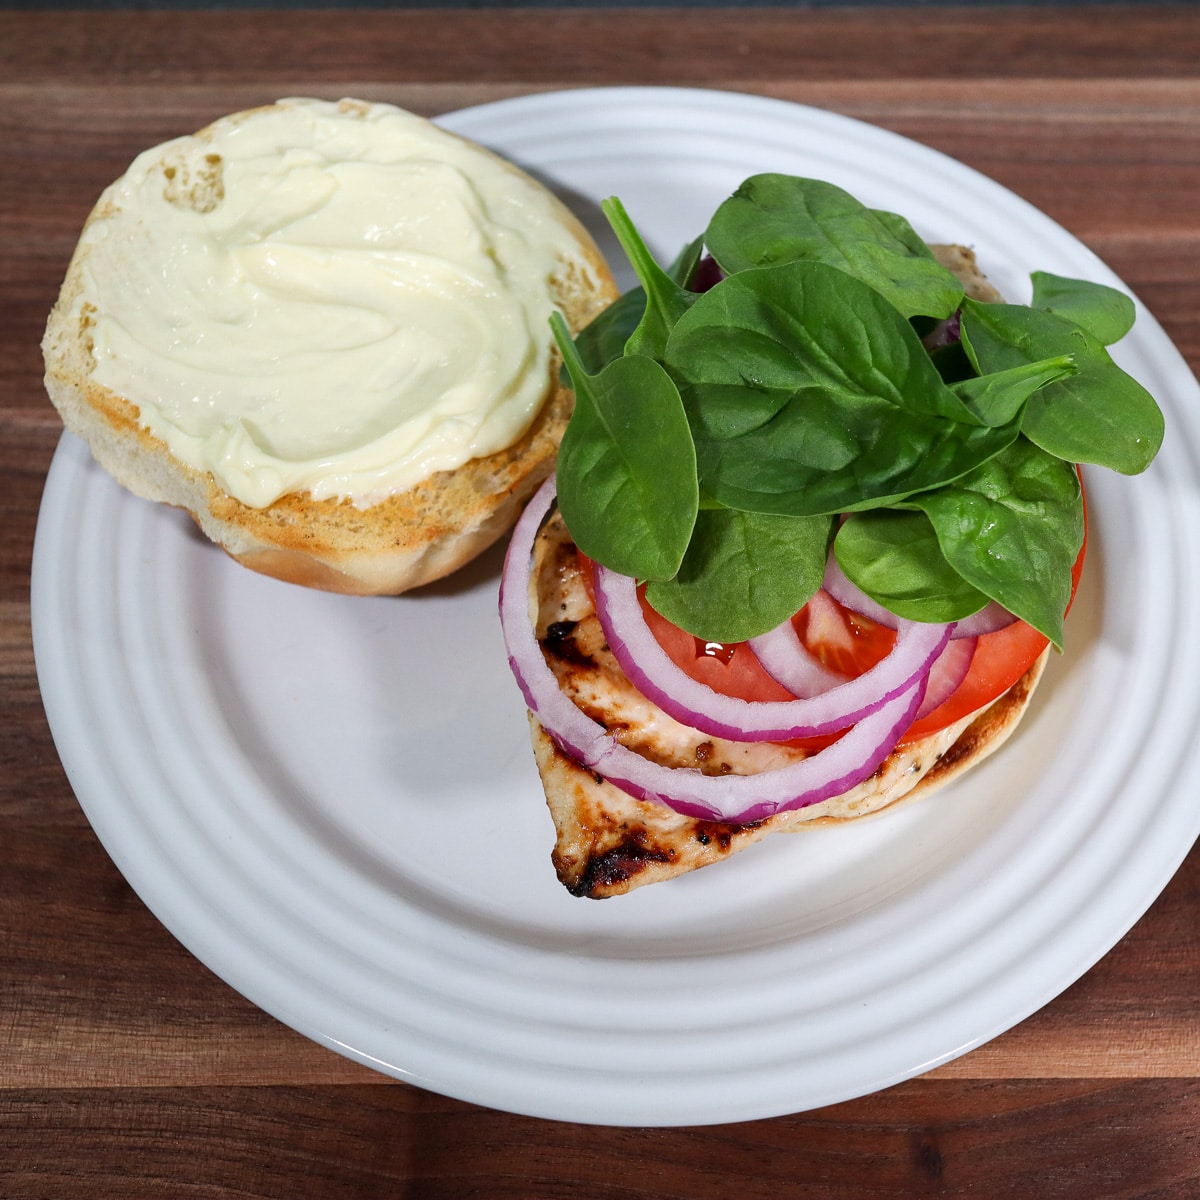 The healthy grilled chicken sandwich made without top bun on